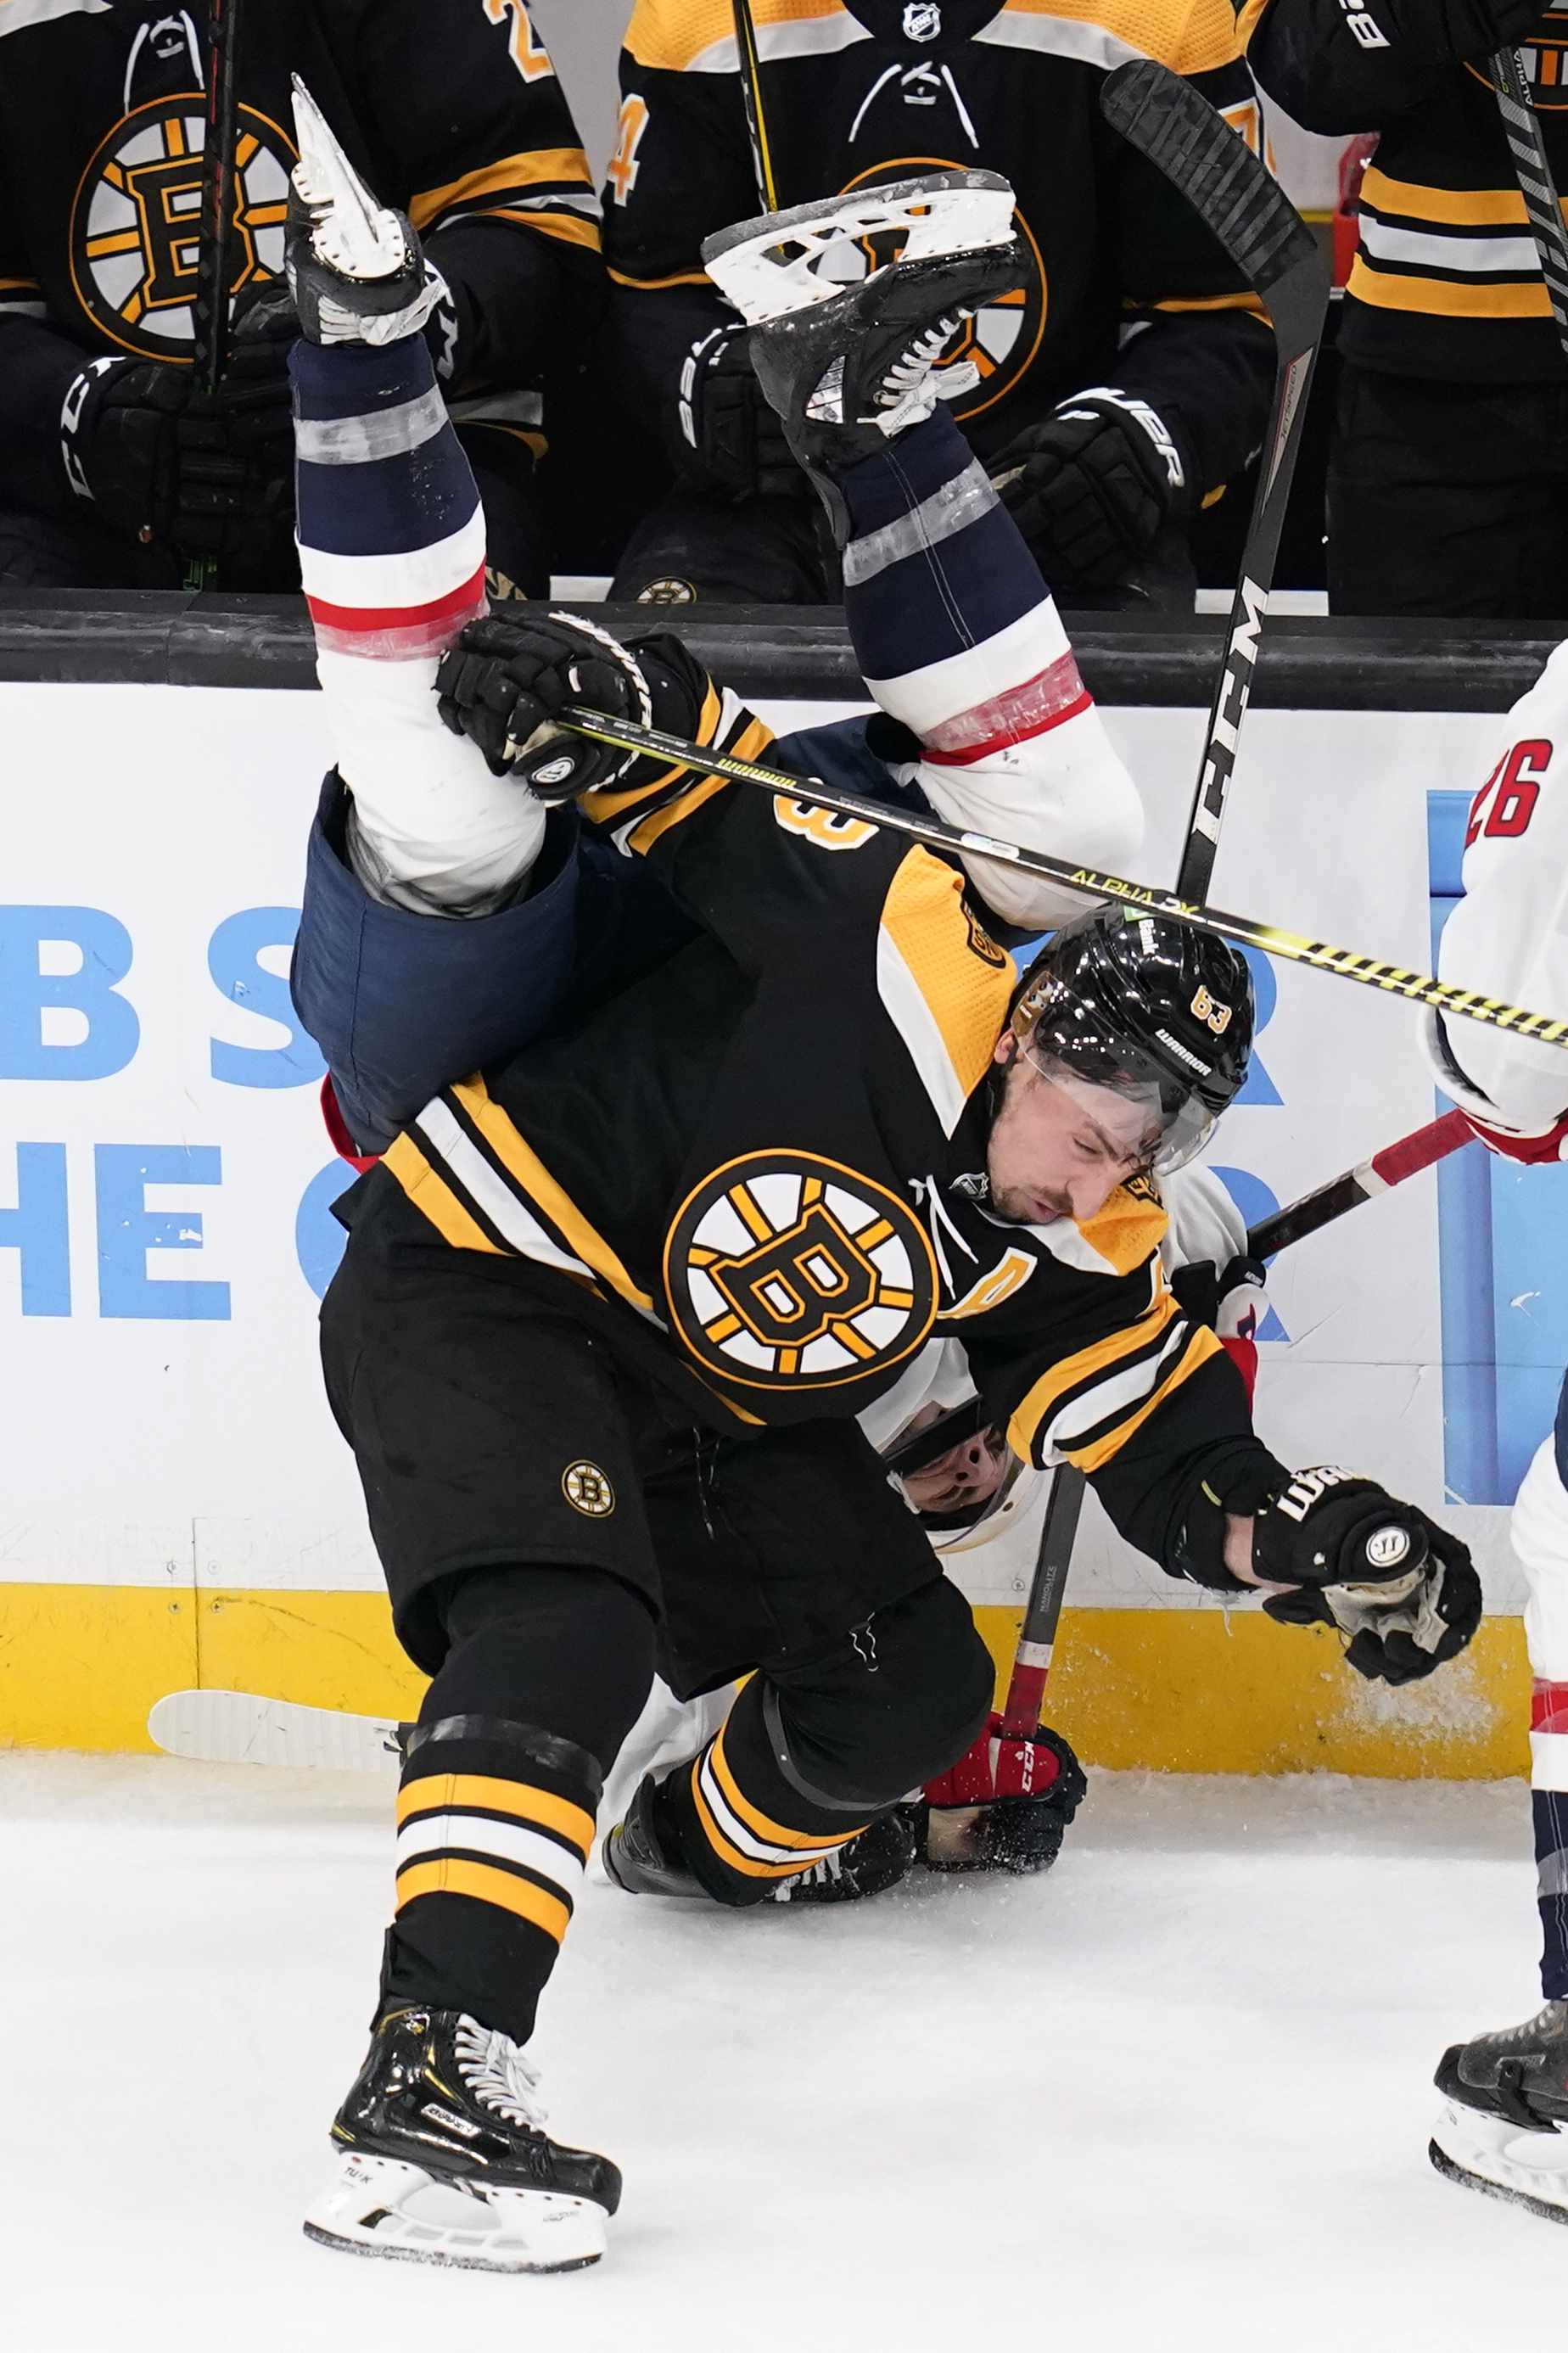 Bruins Broadcast Schedule Released, NESN to Televise 69 B's